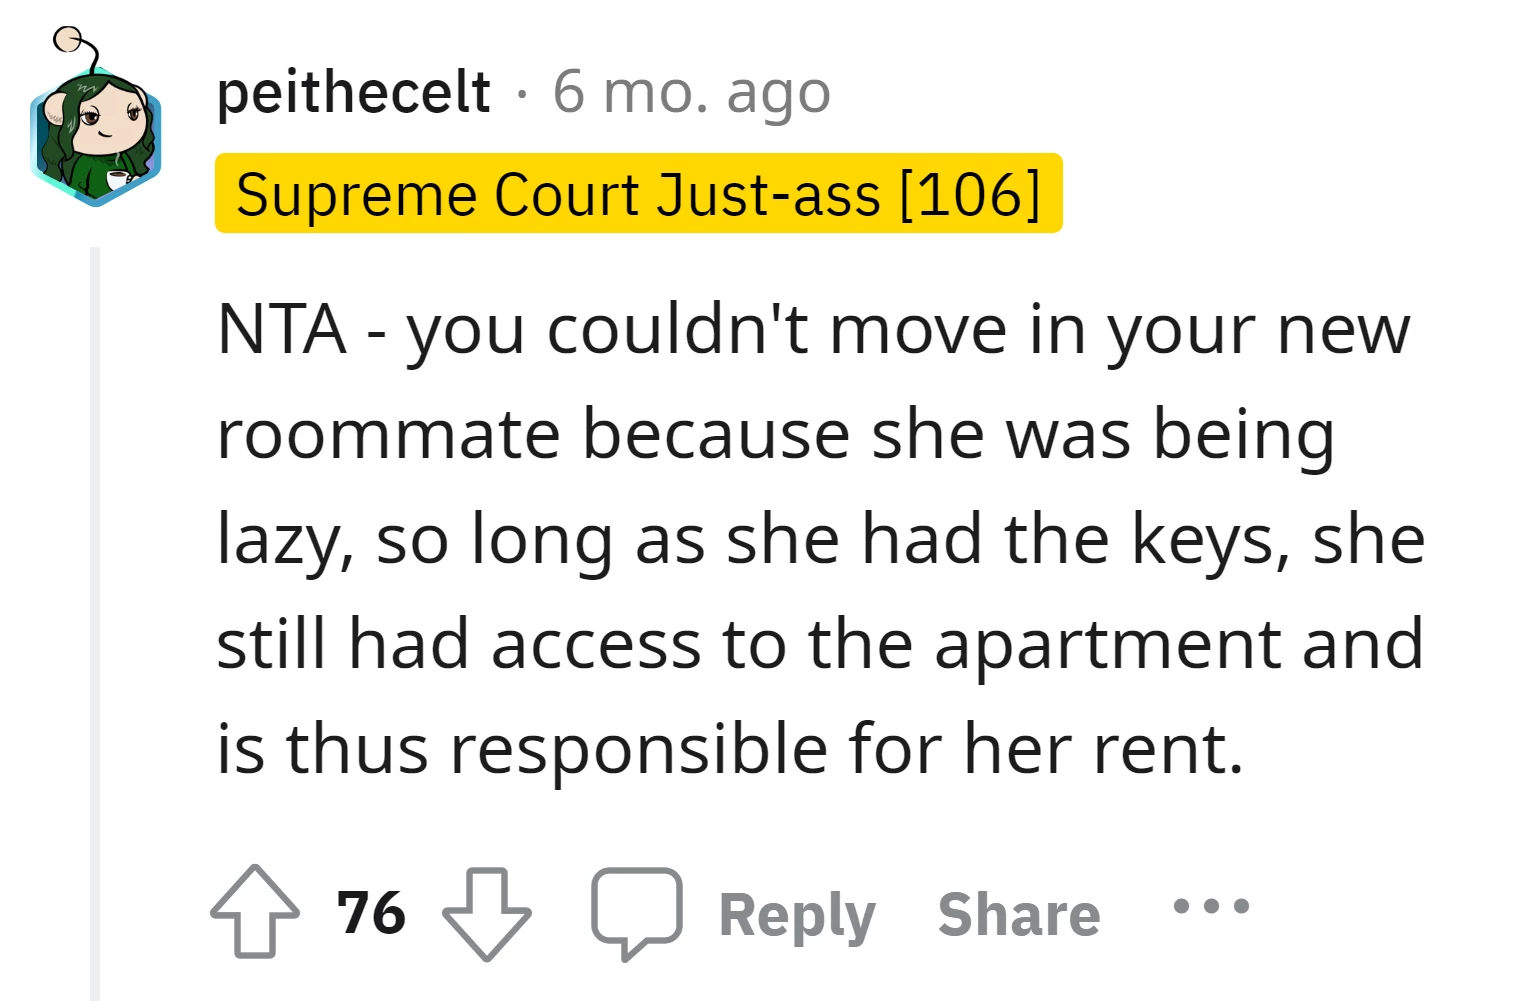 The ex-roommate still had access to the apartment with the keys, so she is responsible for her rent